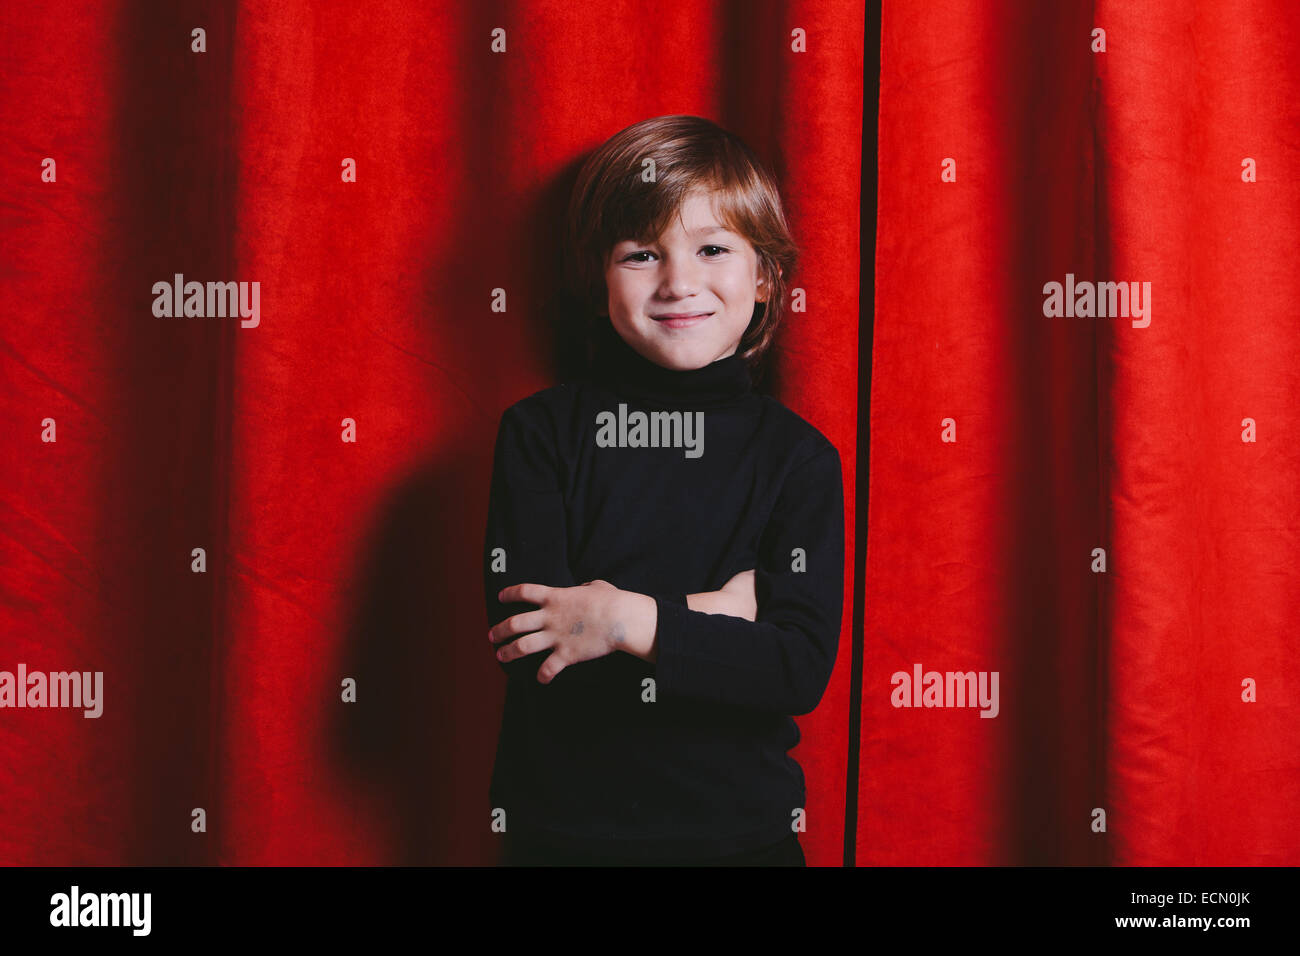 Studio portrait of a five years old boy wearing black clothes Stock Photo